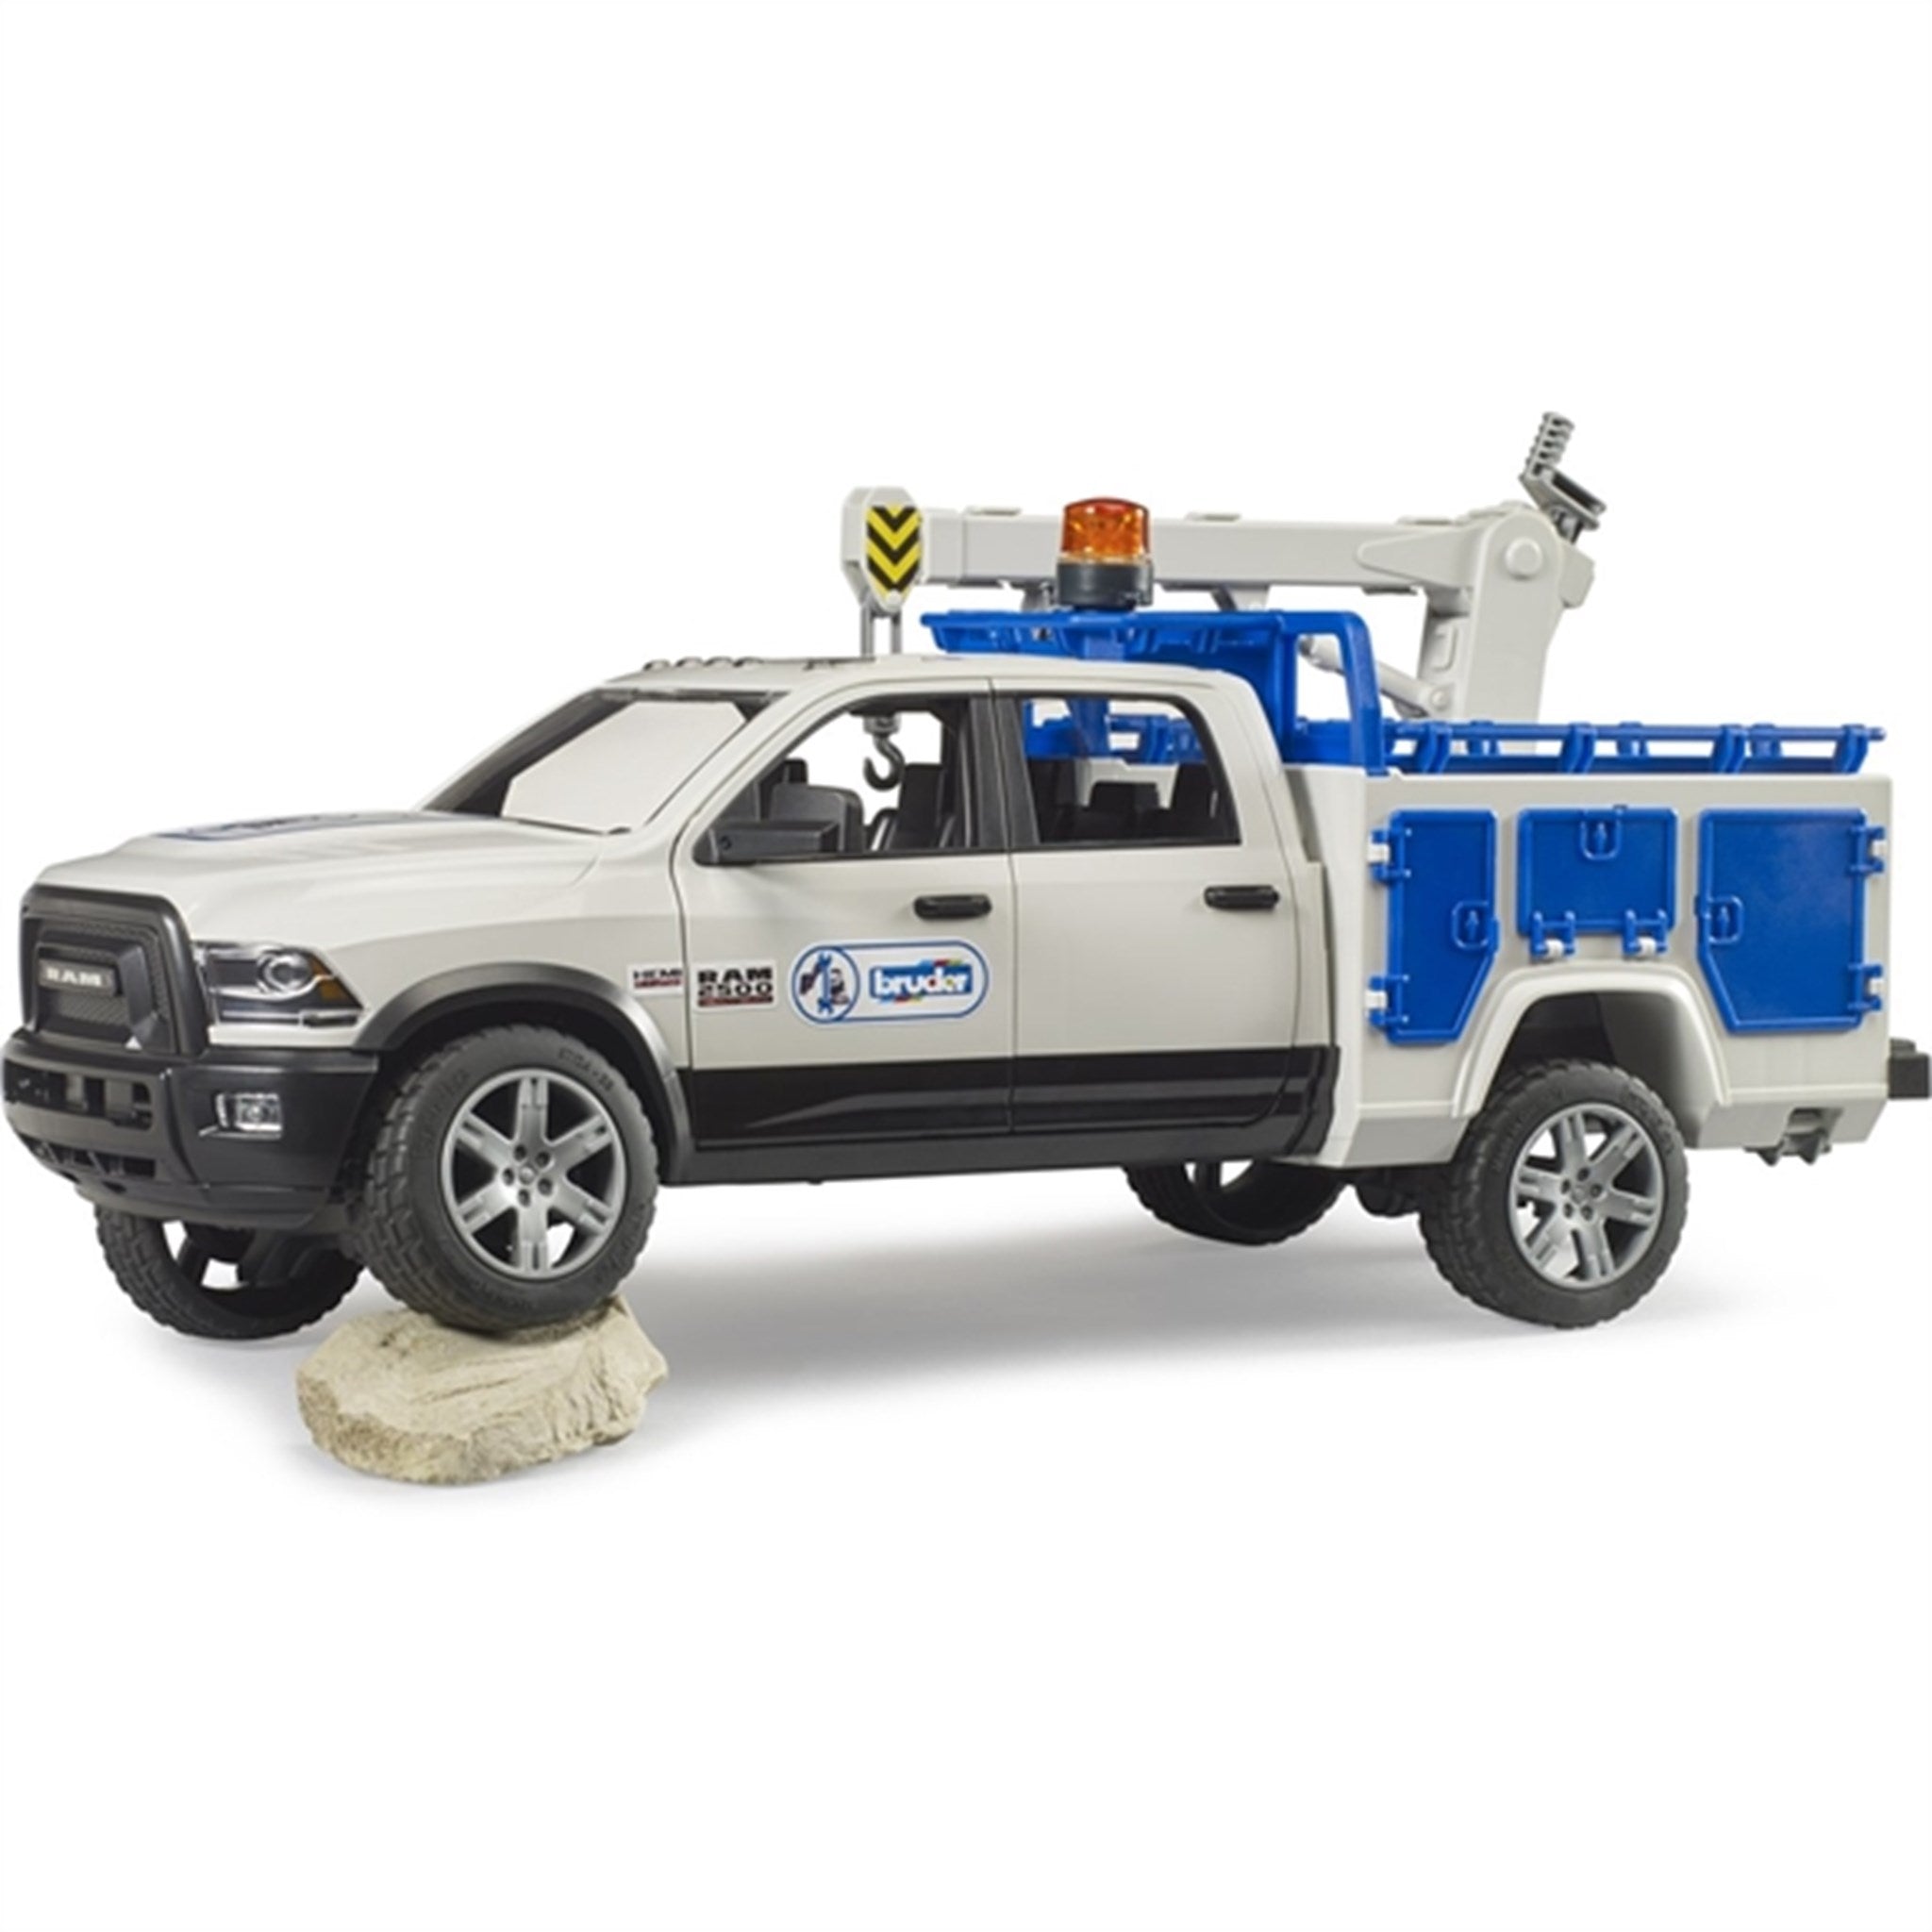 Bruder RAM 2500 Service Truck with Rotating Beacon Light 2